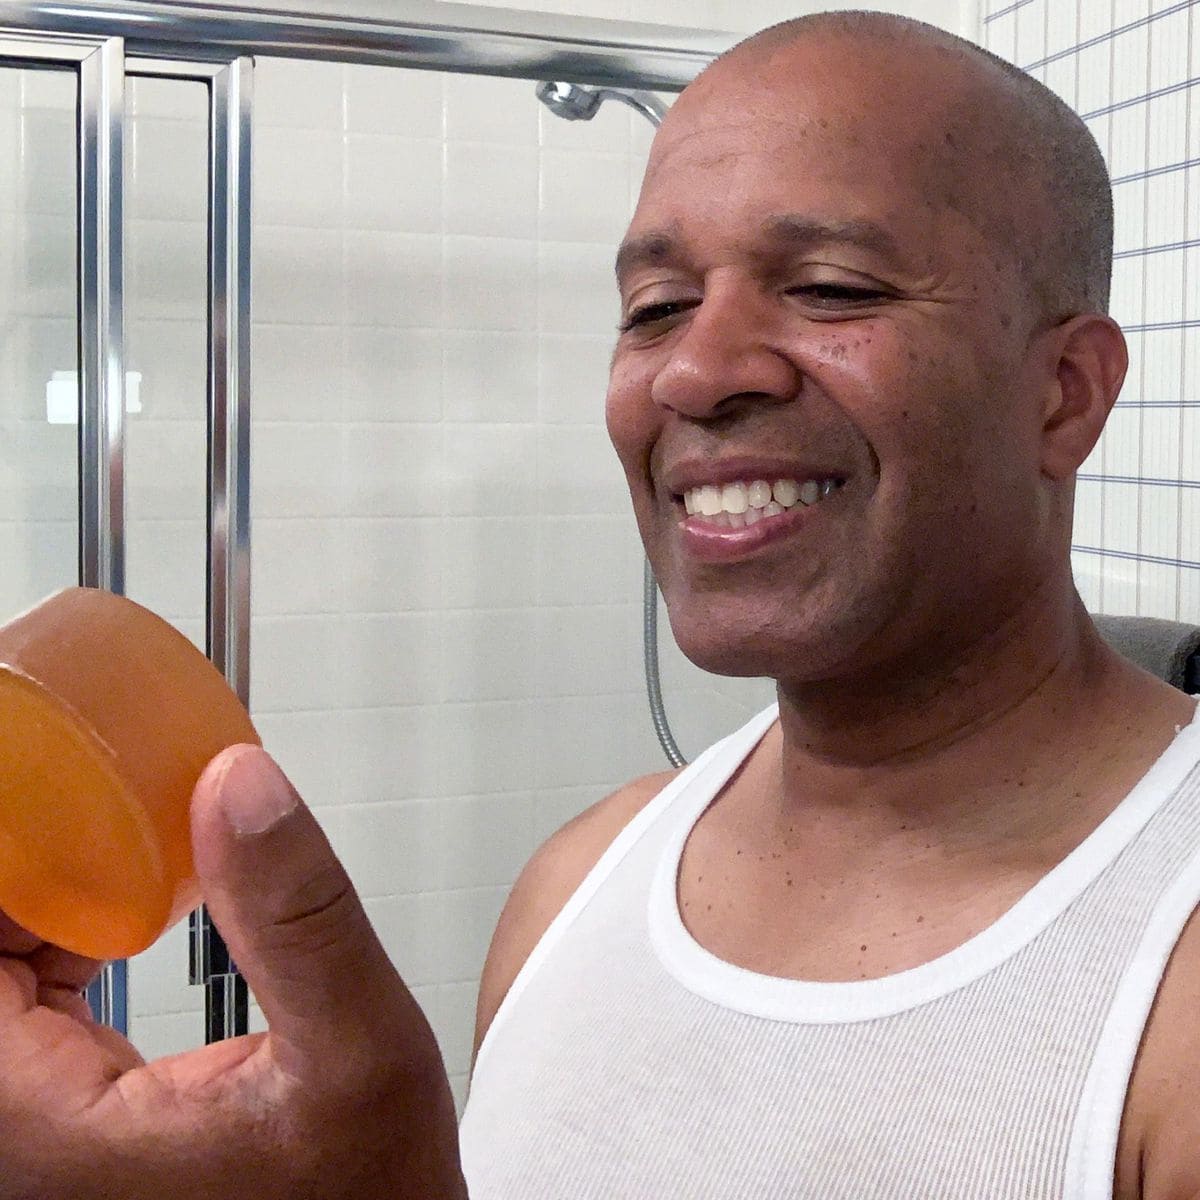 Image of a content customer holding a bar of soap infused with persimmon, specifically designed for deodorizing and neutralizing nonenal-related body odor.